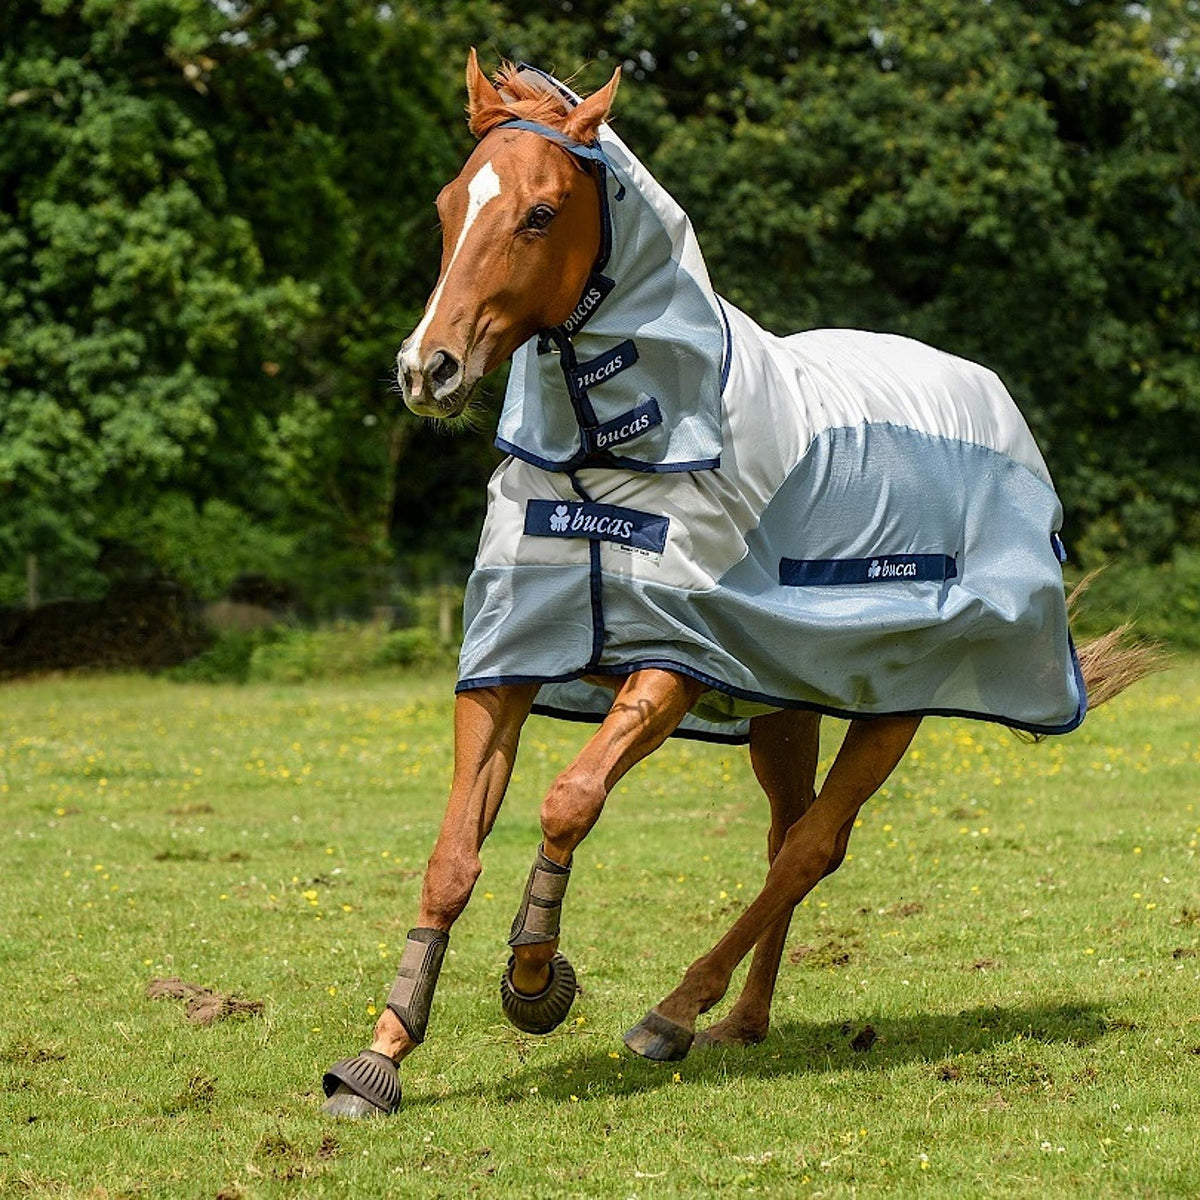 Horse wearing grey fly rug with waterproof top line and navy details.